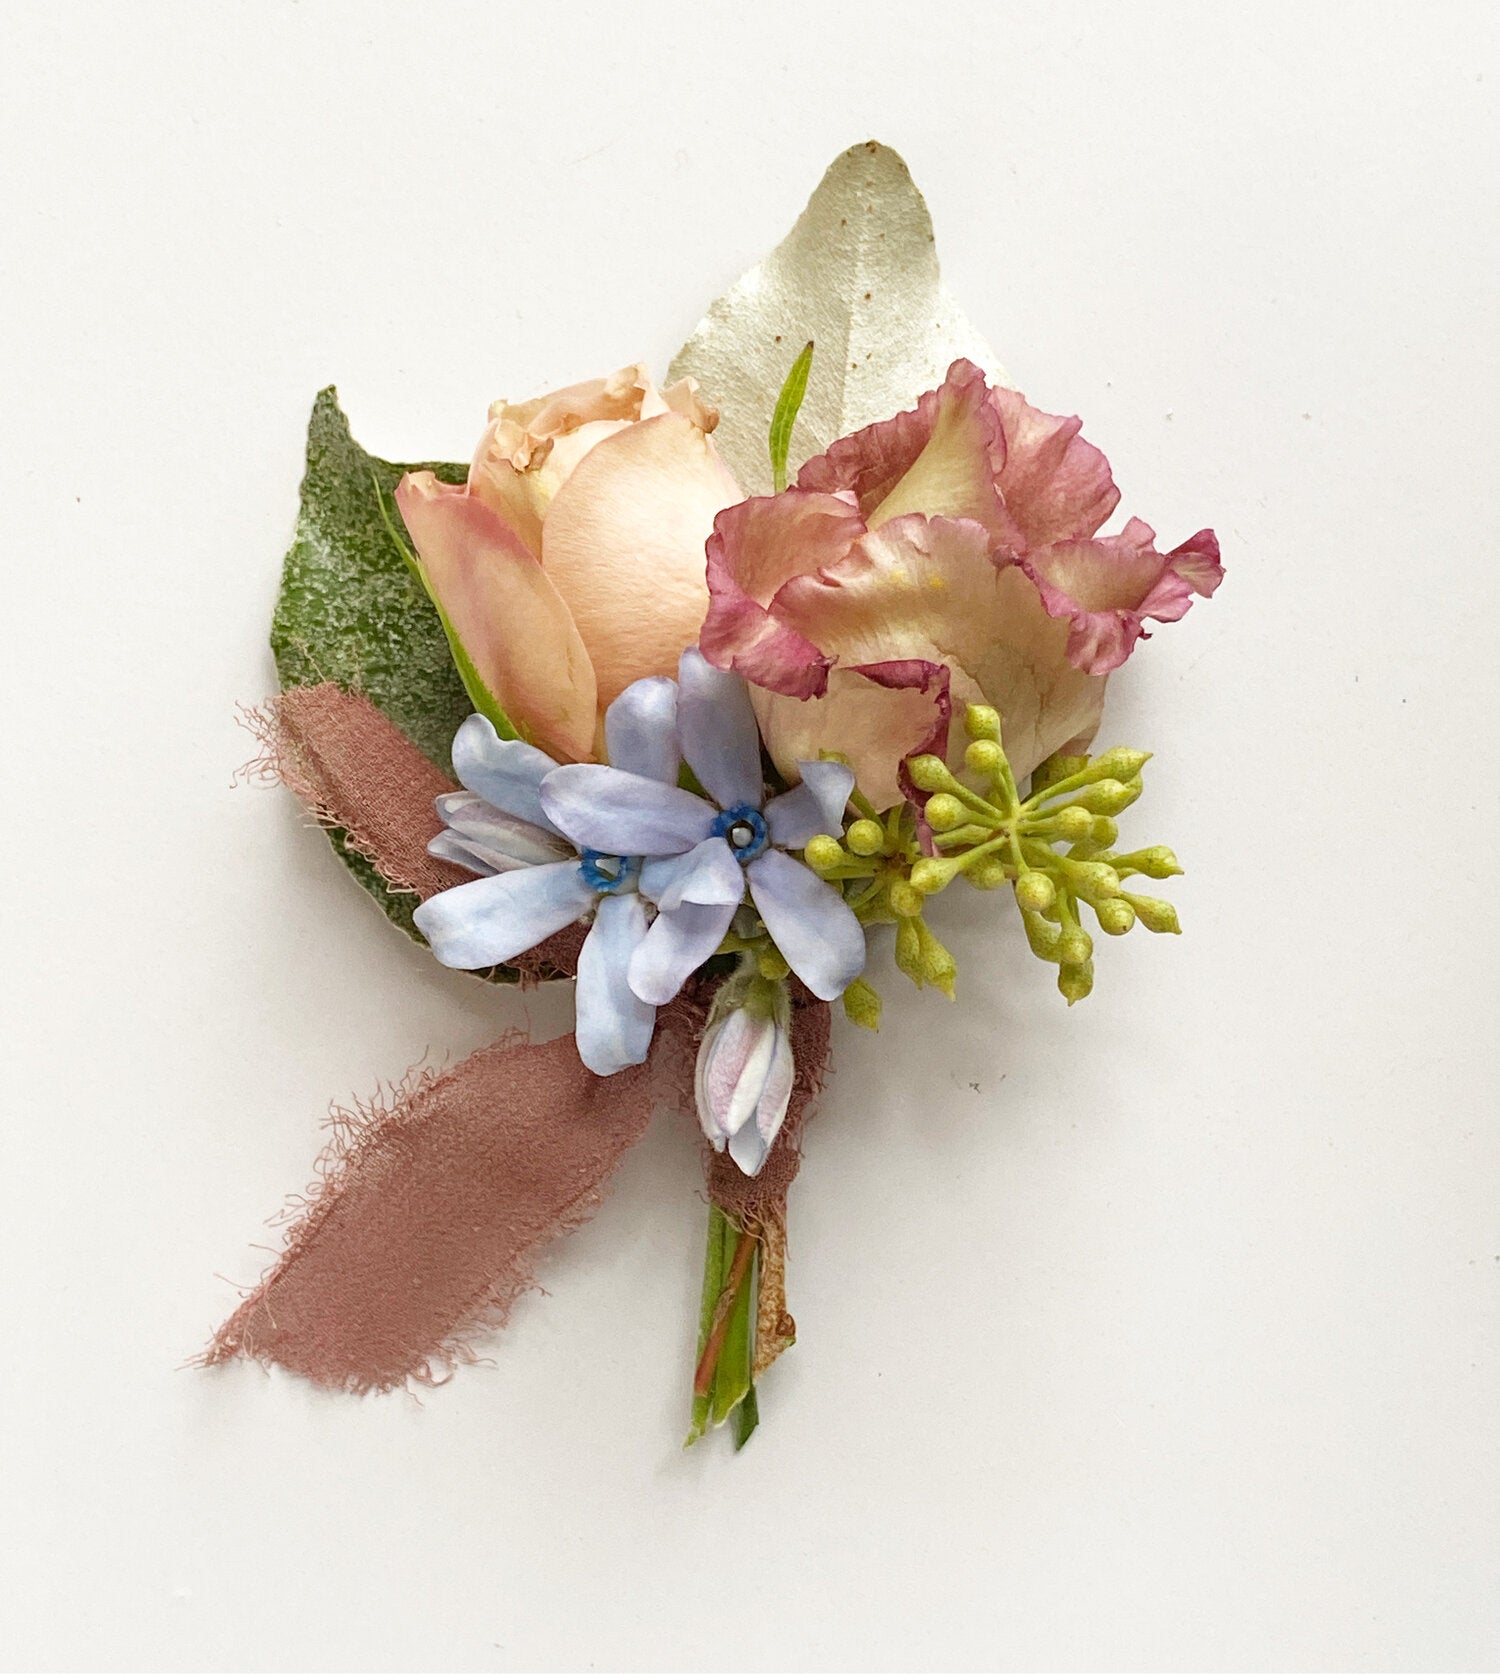 Boutonniere with blush colored flowers. Floral arrangement completed by Everbloom Design a Memphis, Tennessee based floral studio.